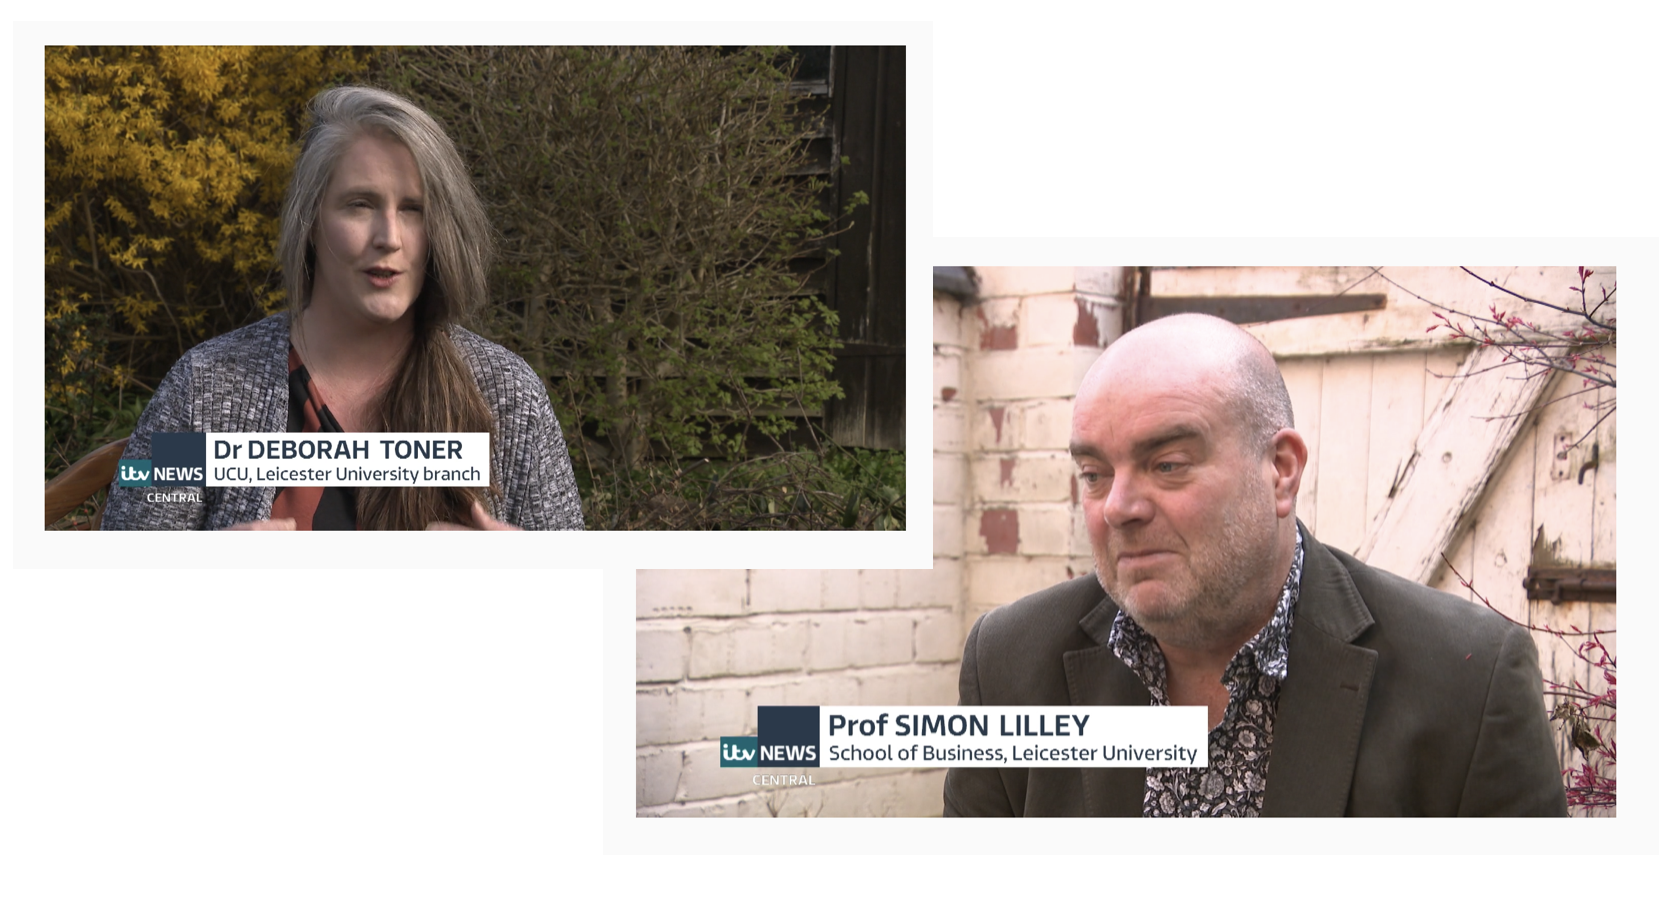 Pictures of Deborah Toner and Simon Lilley